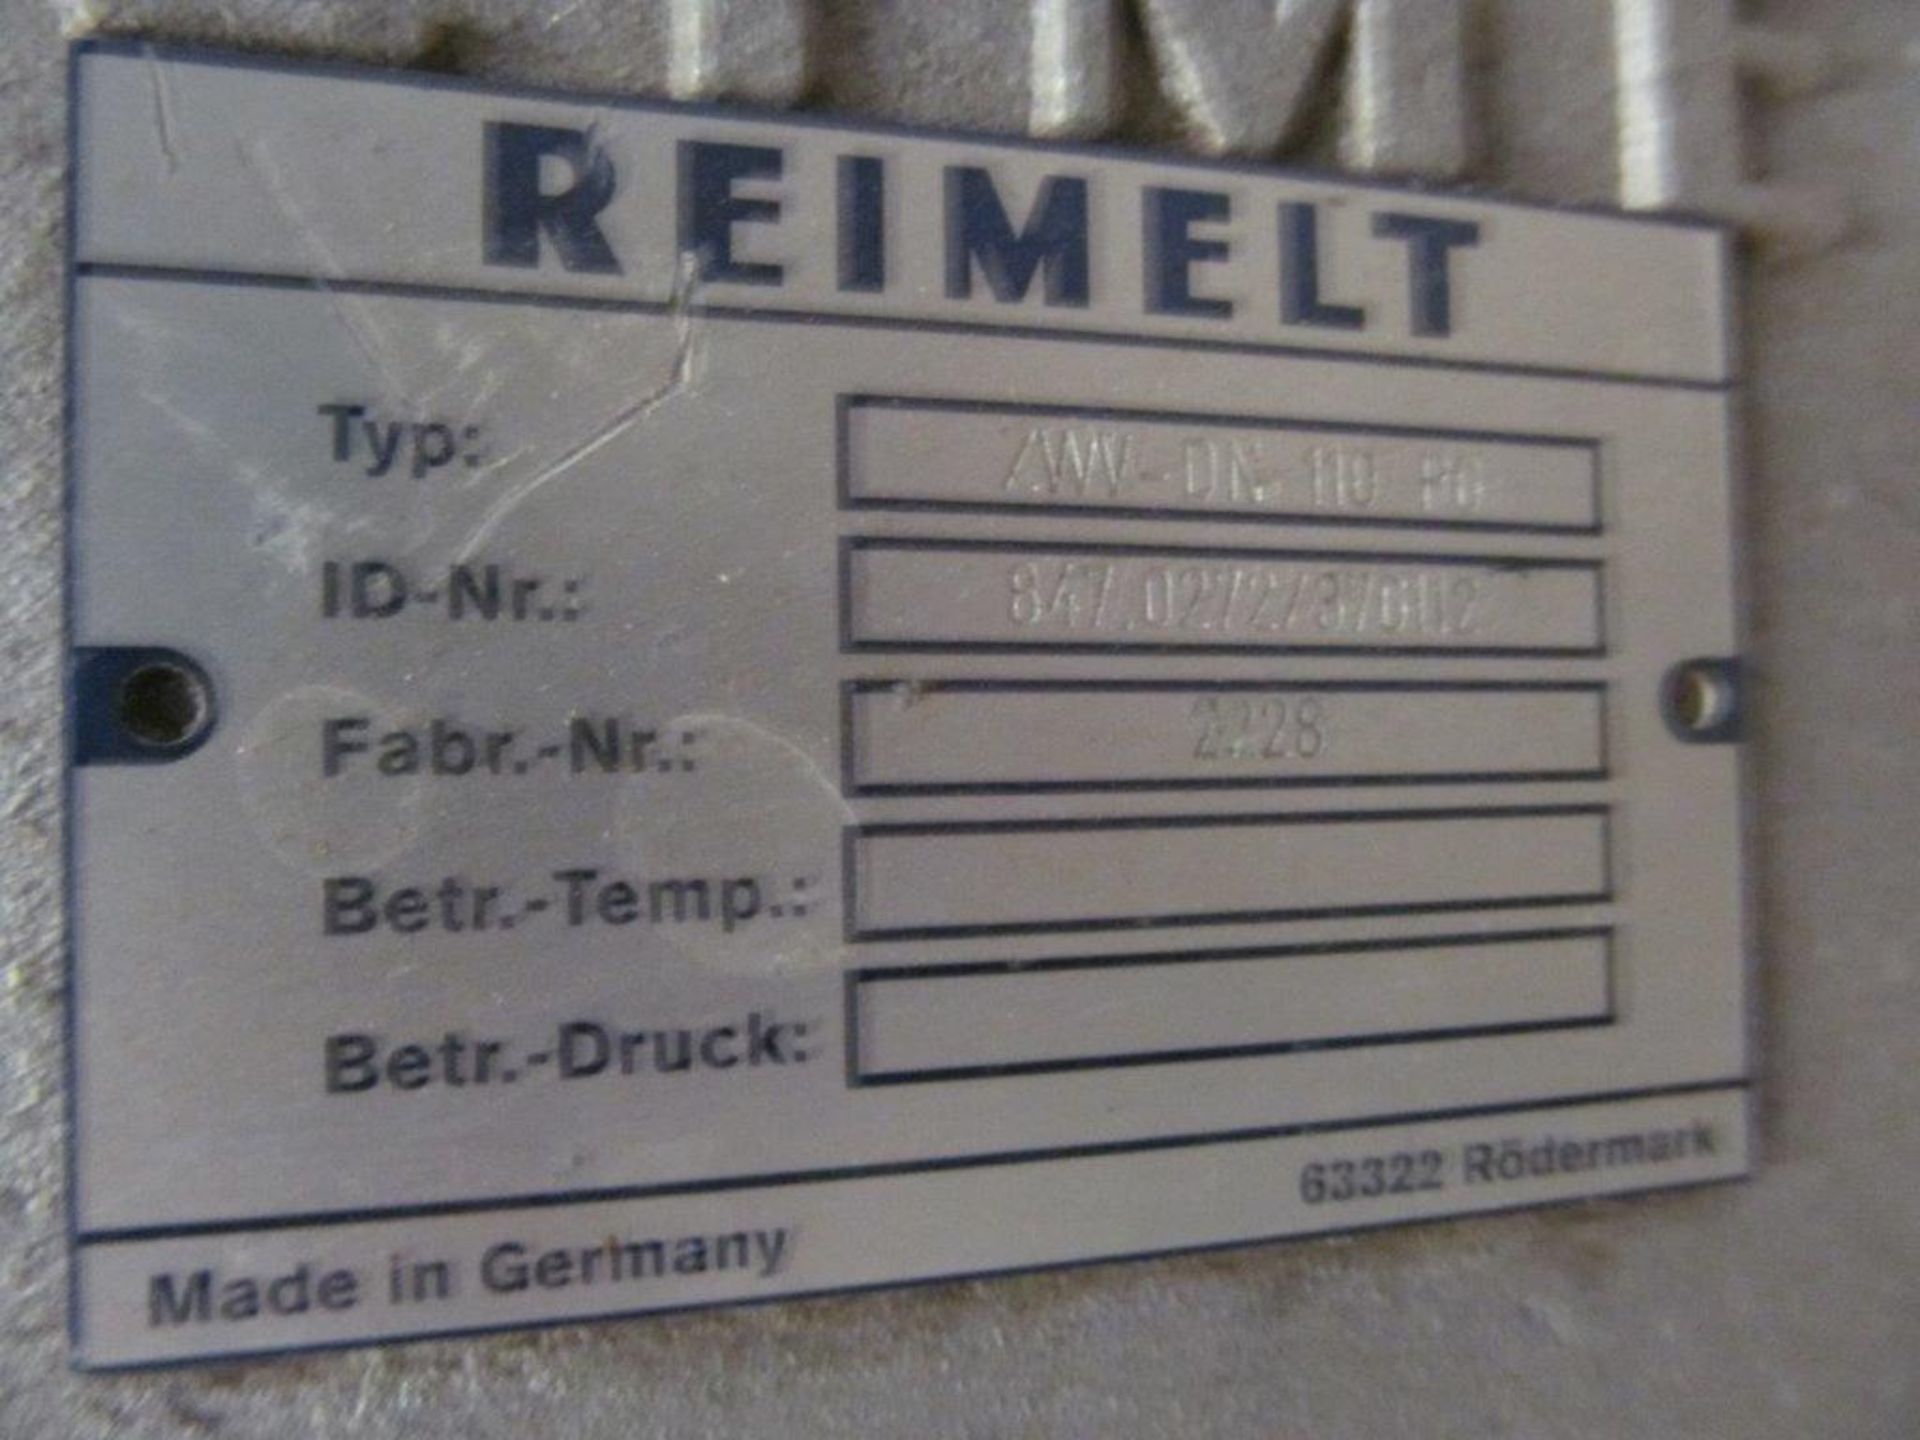 REIMELT (GERMANY) DIVERTERS, TYPE ZWV-DN110P6, 4-1/2" OPENING, ALUMINUM - Image 4 of 5